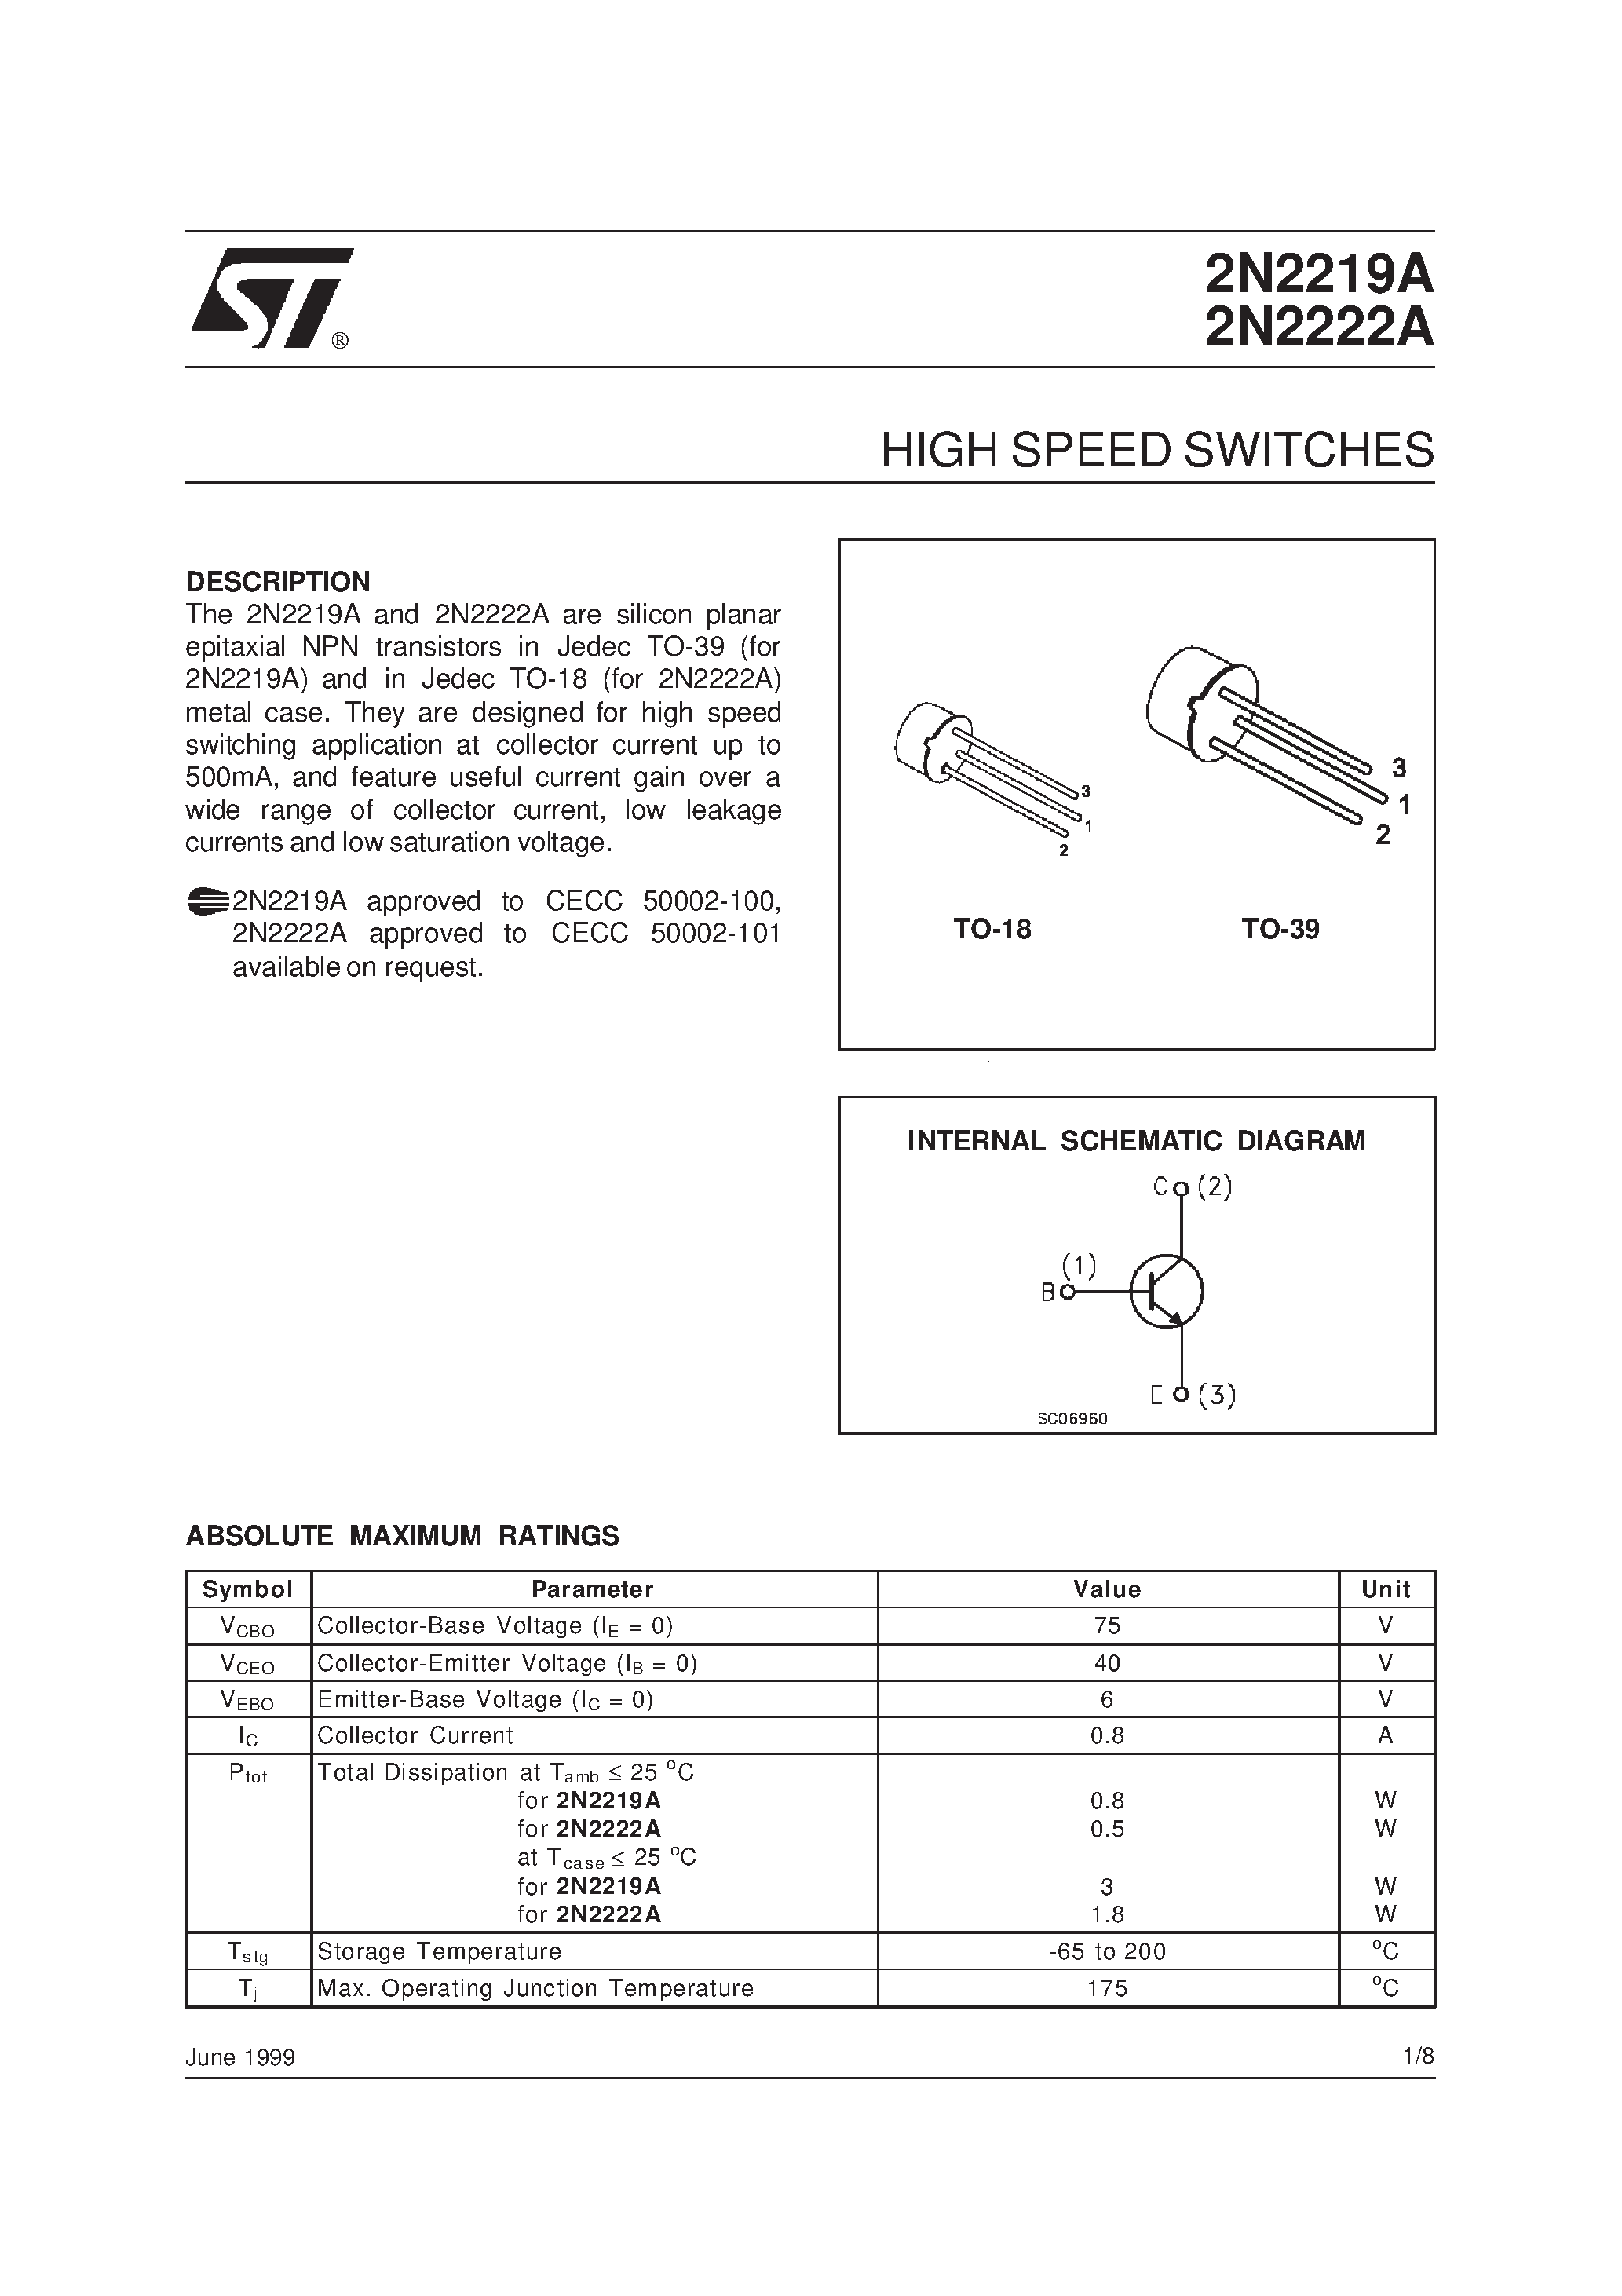 Datasheet 2N2219A - HIGH SPEED SWITCHES page 1